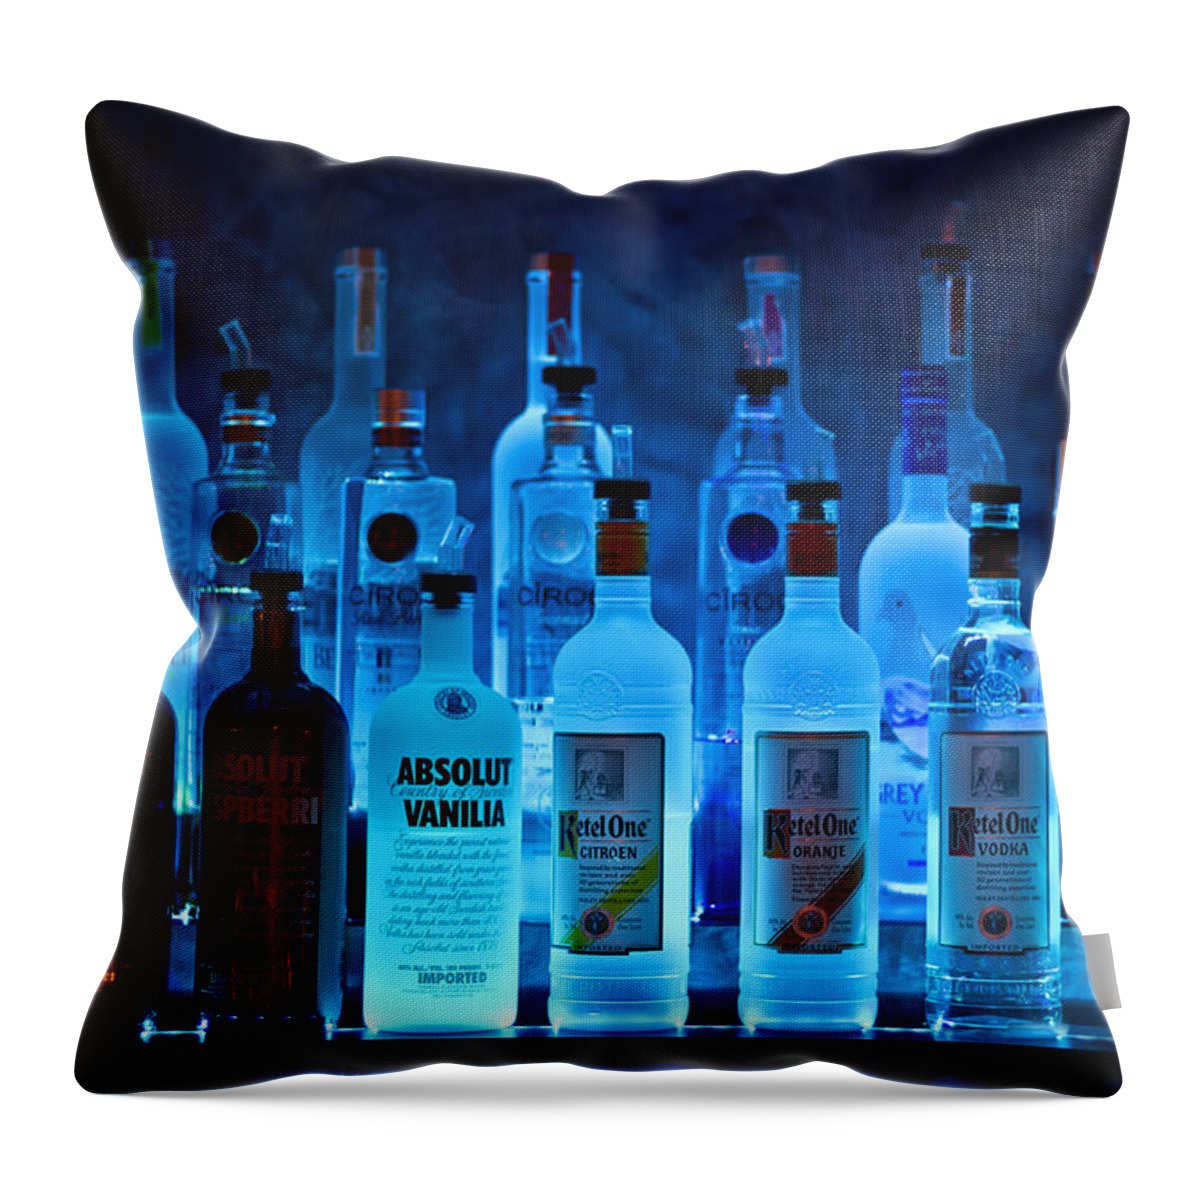 Blue Throw Pillow featuring the photograph Blue Night Shadows by Evelina Kremsdorf